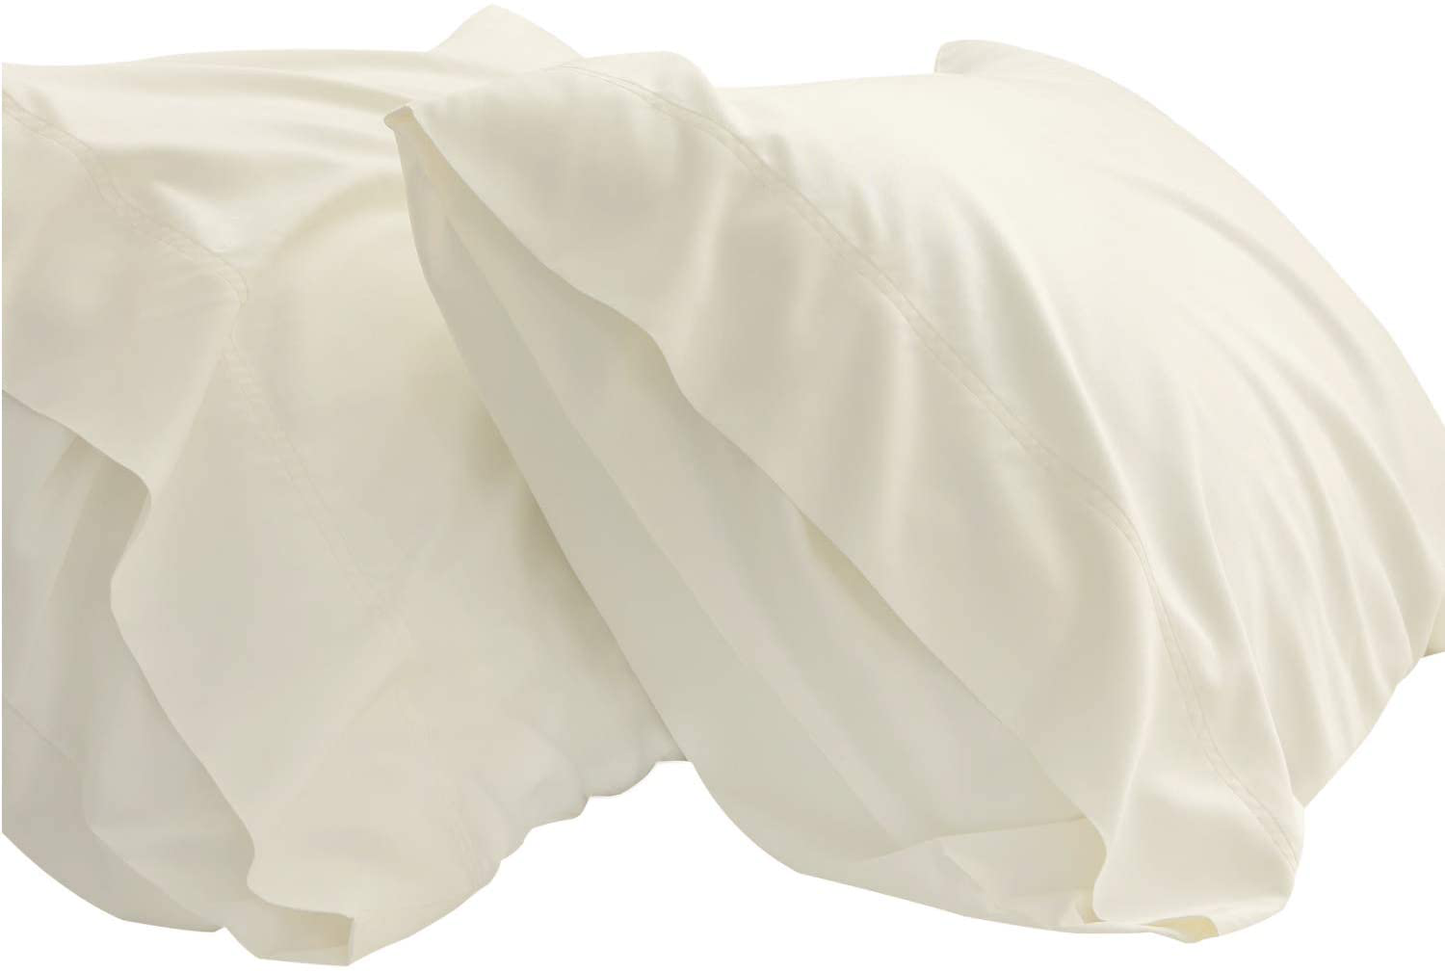 Bedsure Bamboo Pillow Cases Queen Size Set of 2 - Cream Cooling Pillowcases 2 Pack with Envelope Closure, Cool and Breathable Pillow Case, 20x30 inches